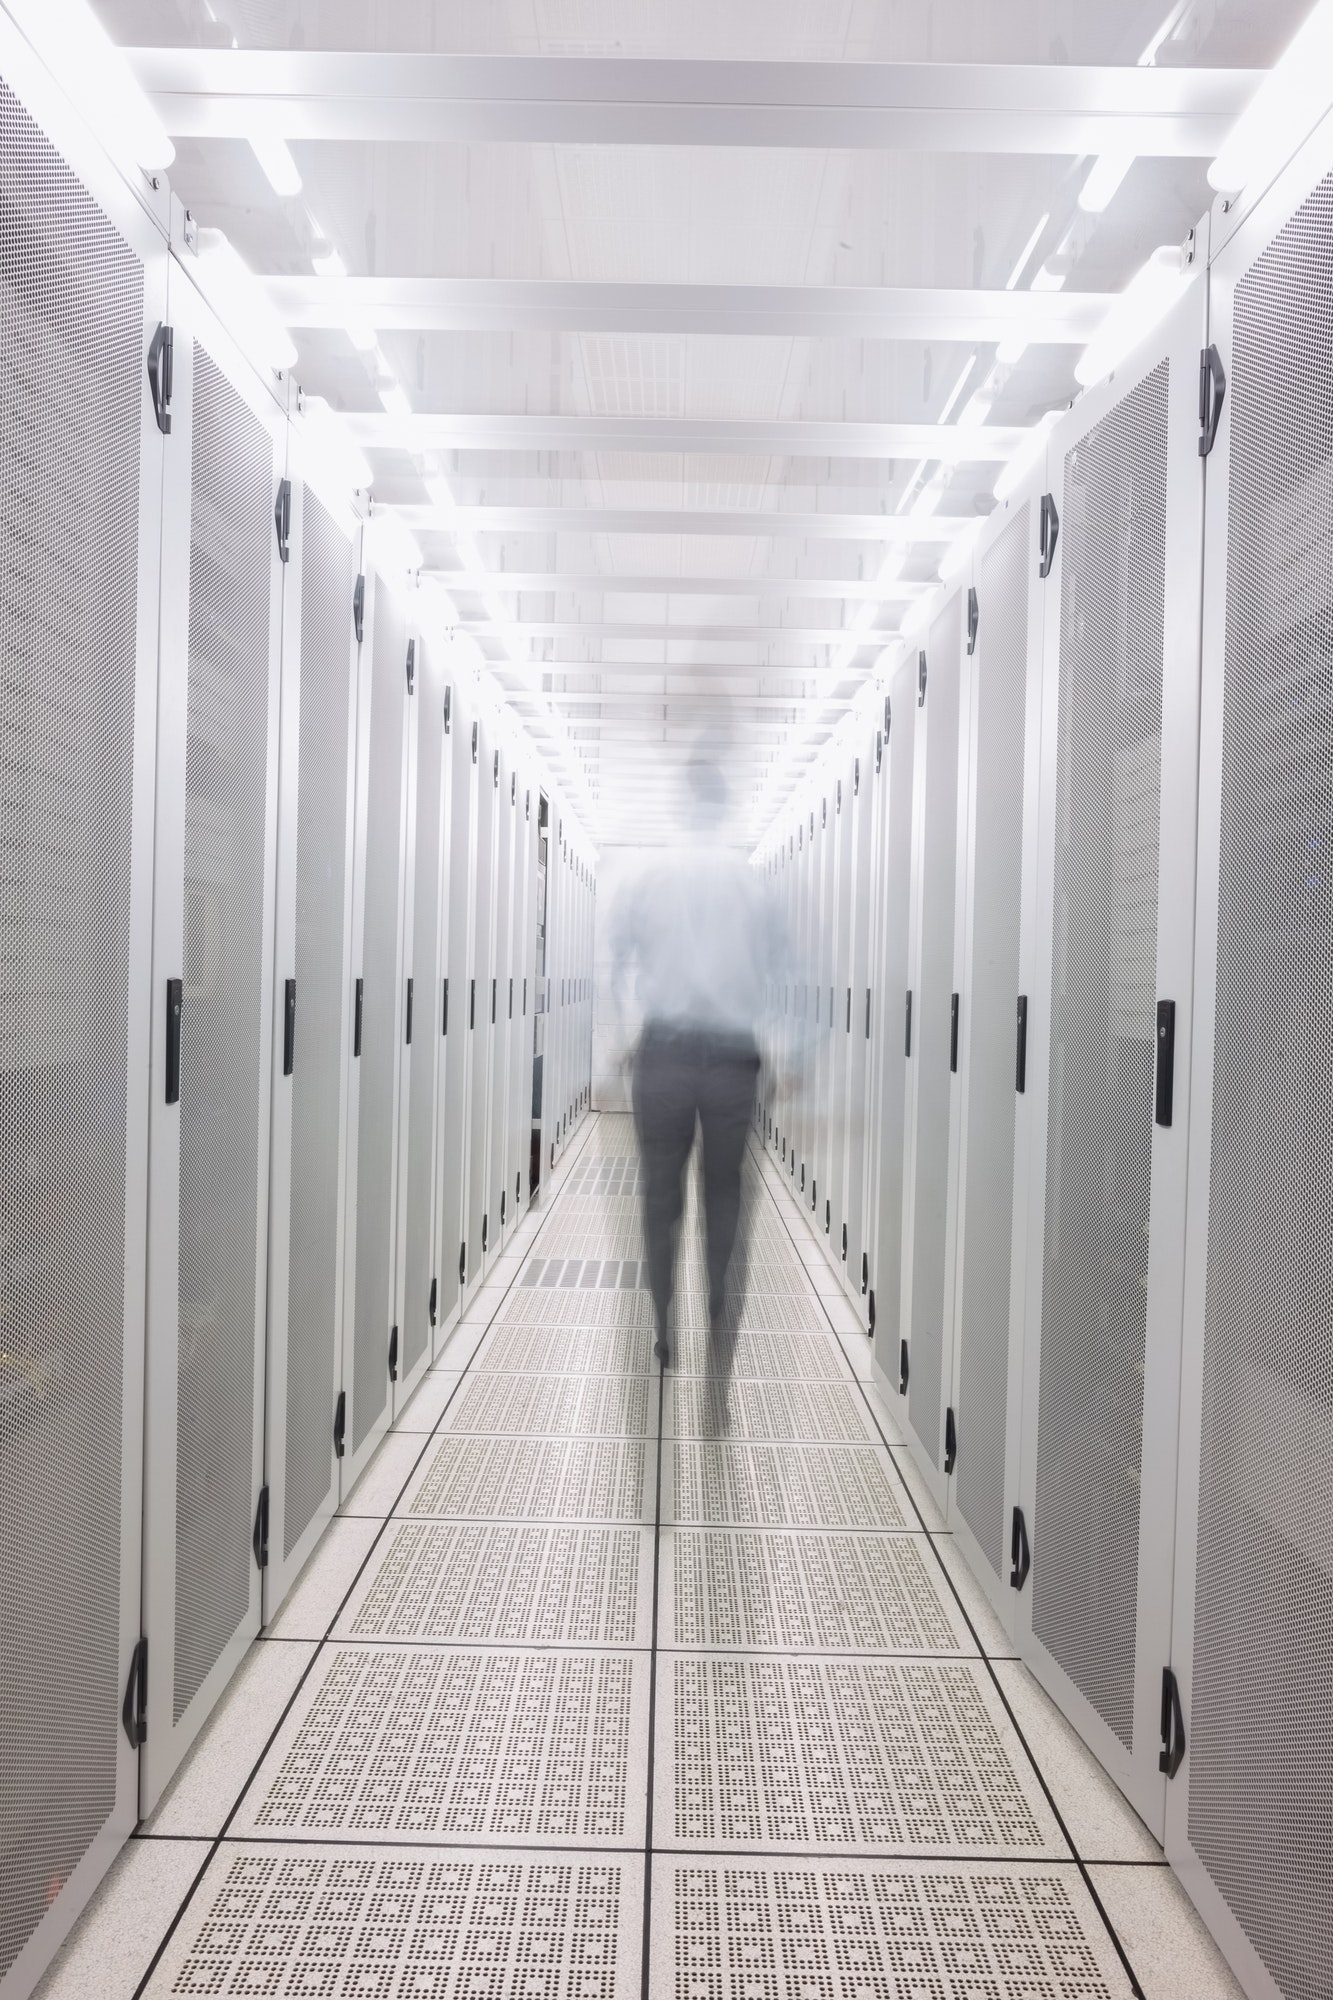 Blurred technician walking to the camera in a large data center